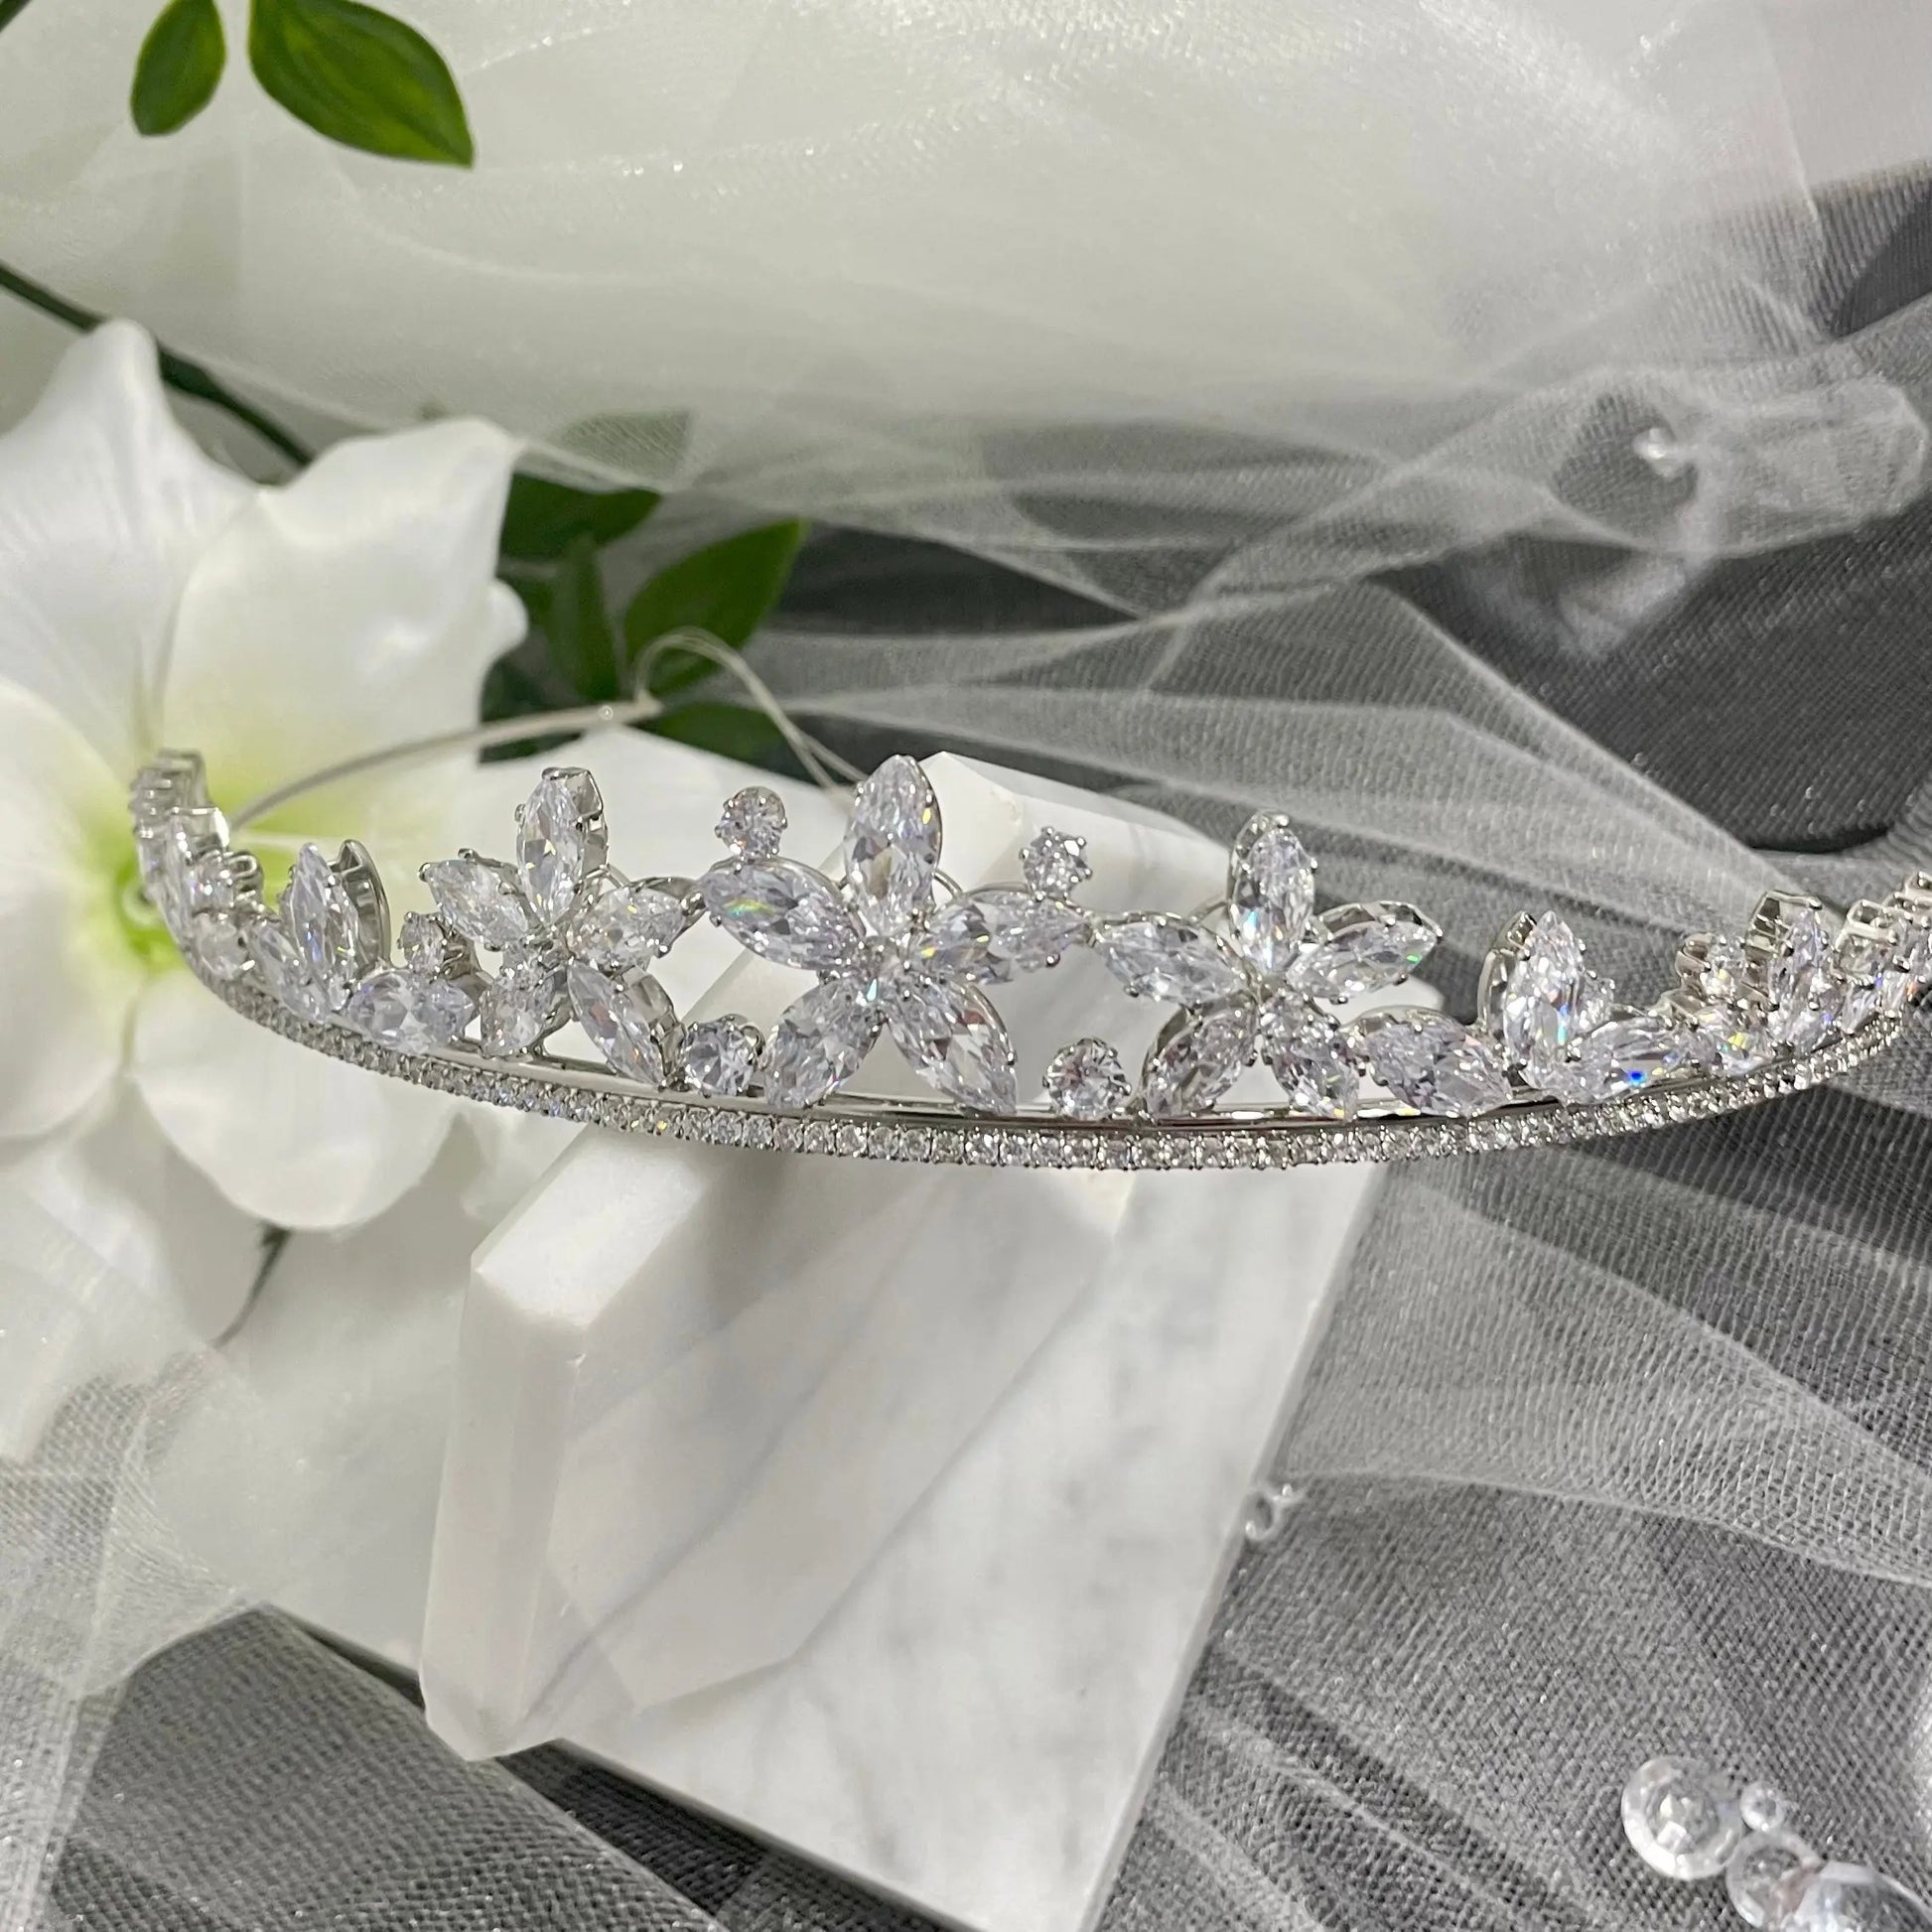 Katty Floral Crystal Headpiece Tiara, featuring elegant flower-like crystals and scattered CZs, perfect for adding a touch of regal elegance to any special occasion outfit.